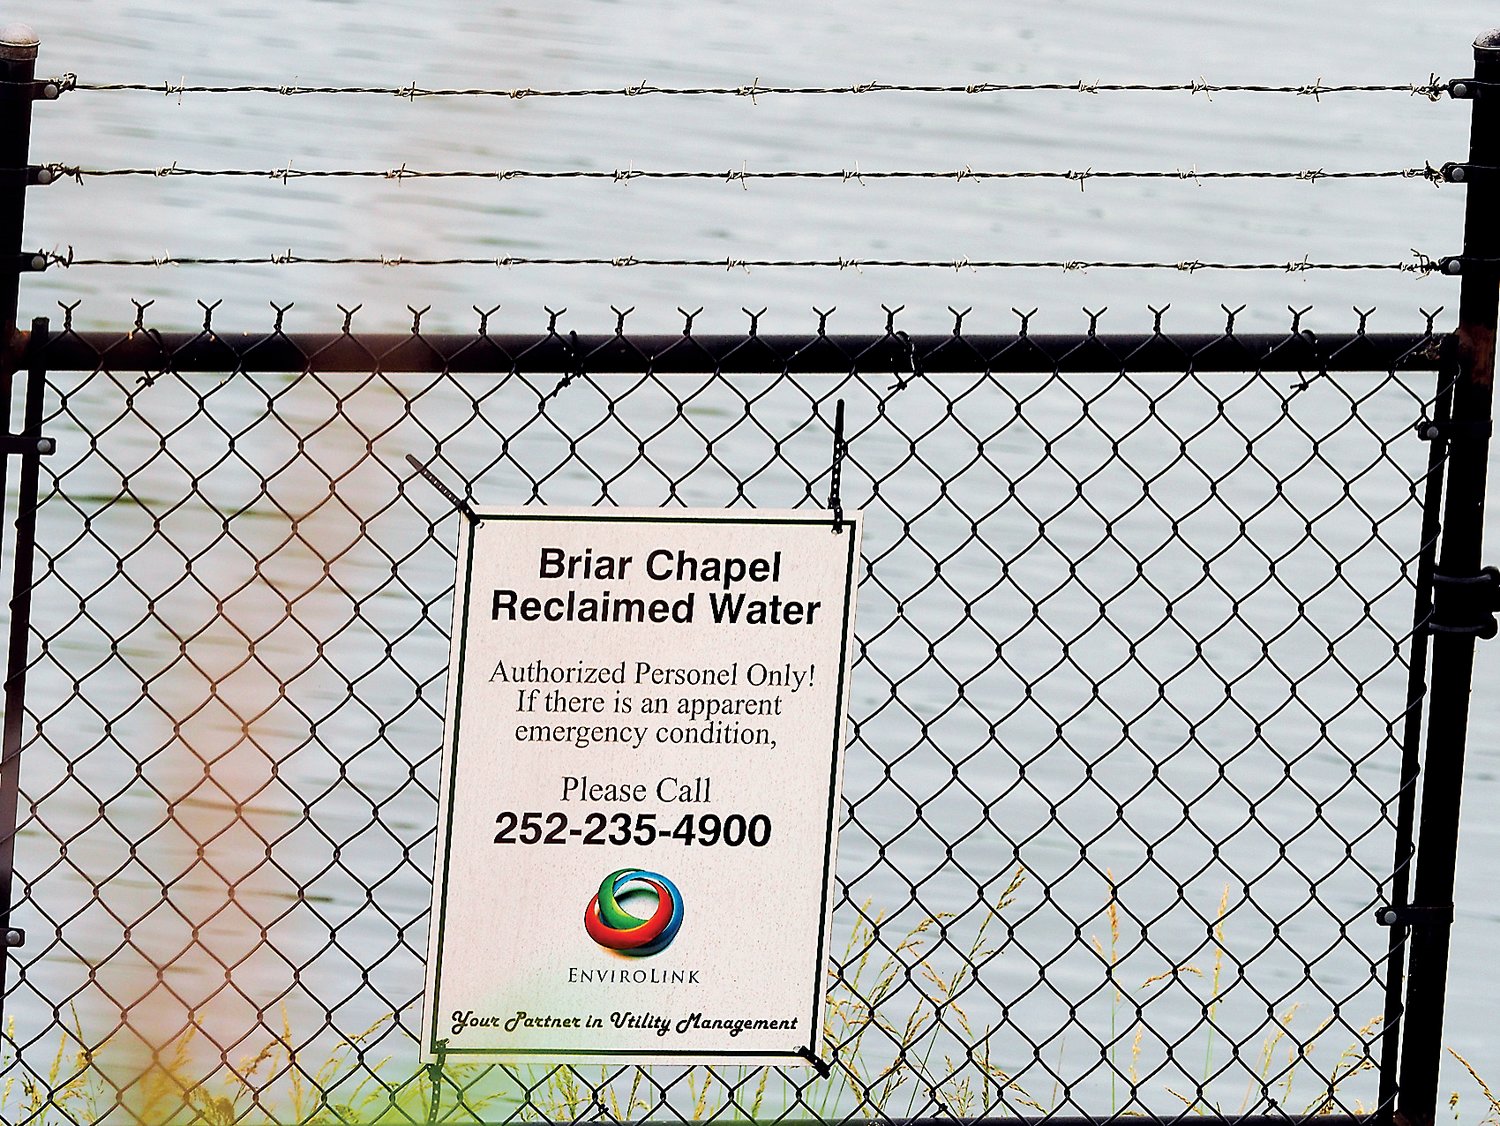 Unlike communities within Chatham's municipal districts, which are served by distant regional wastewater treatment plants, Briar Chapel has its sewage facility inside the neighborhood. Frequent spills have bathed surrounding homes in foul odors and sewage overflow.